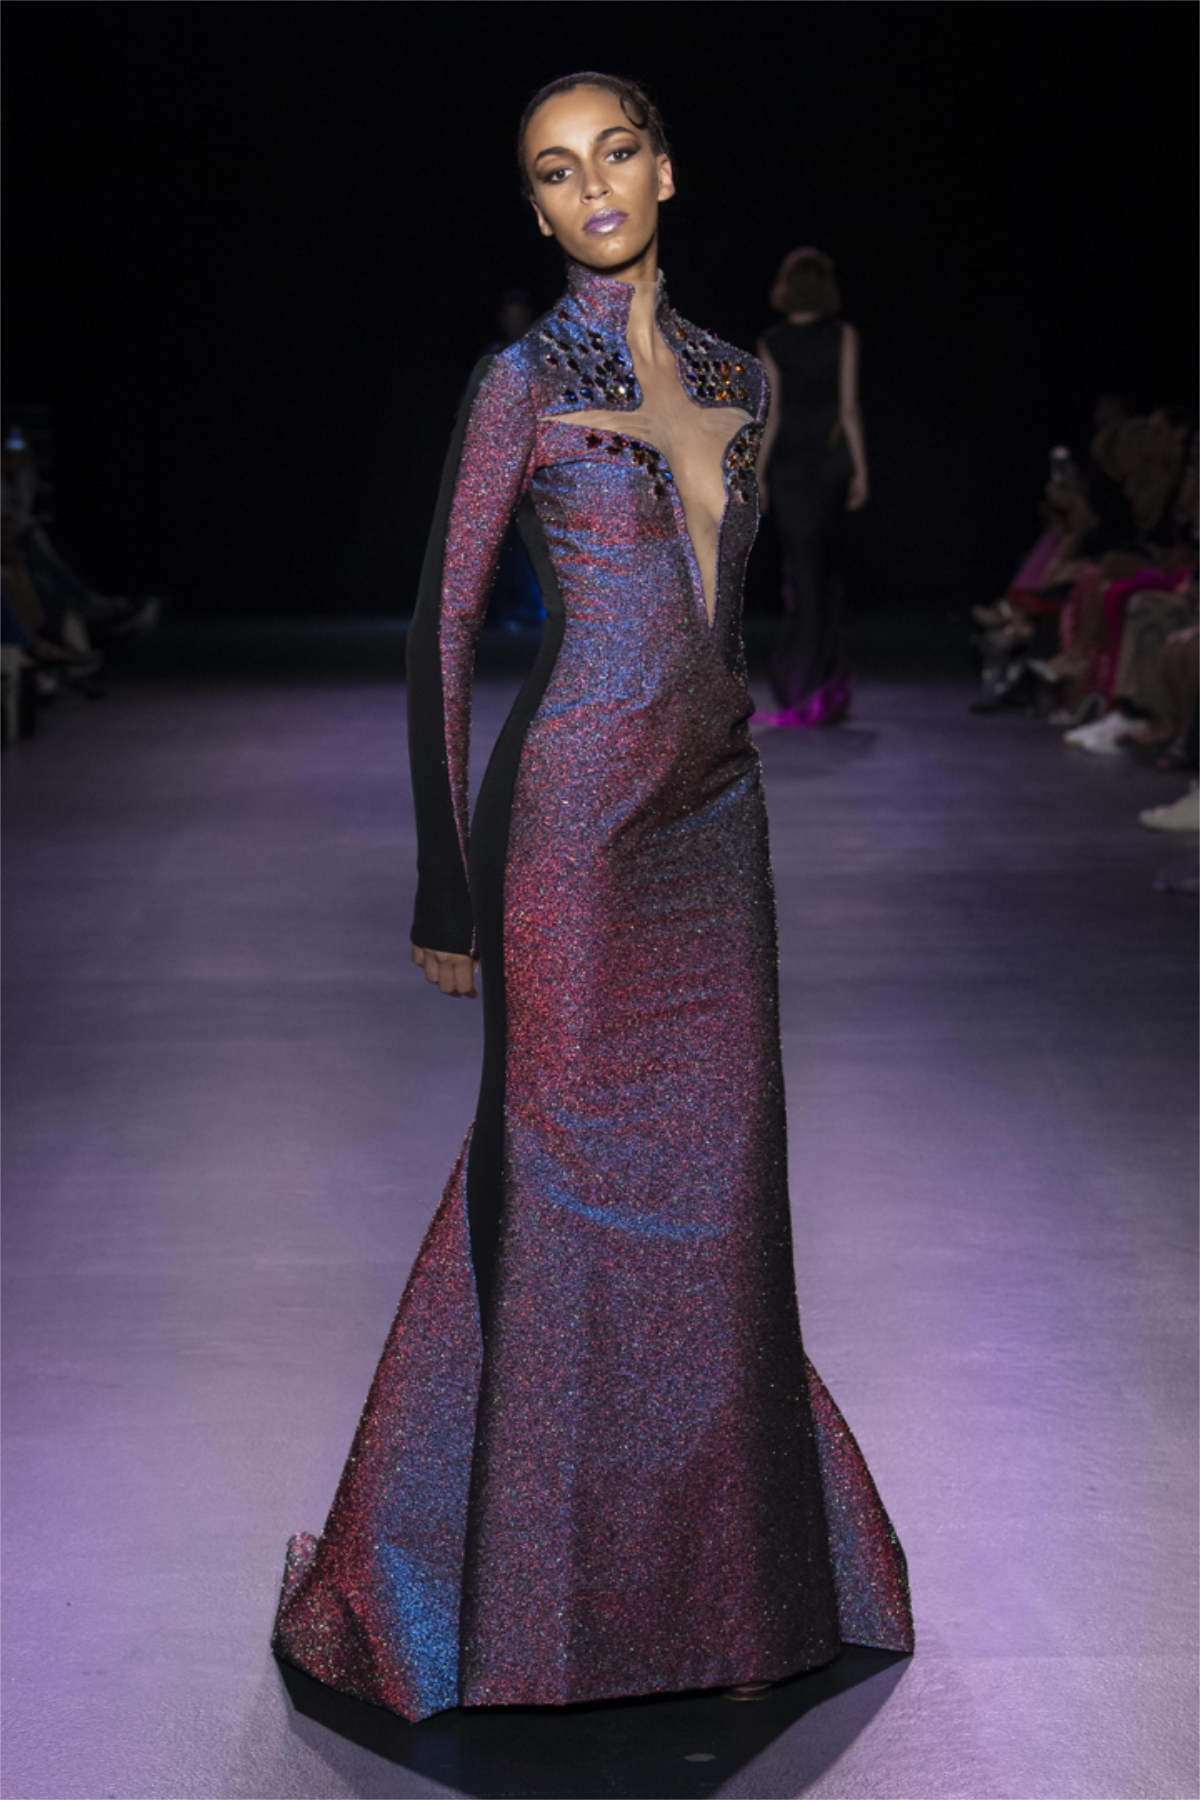 Julien Fournié Presents His New Haute Couture Fall-Winter 2022 Collection: First Creatures